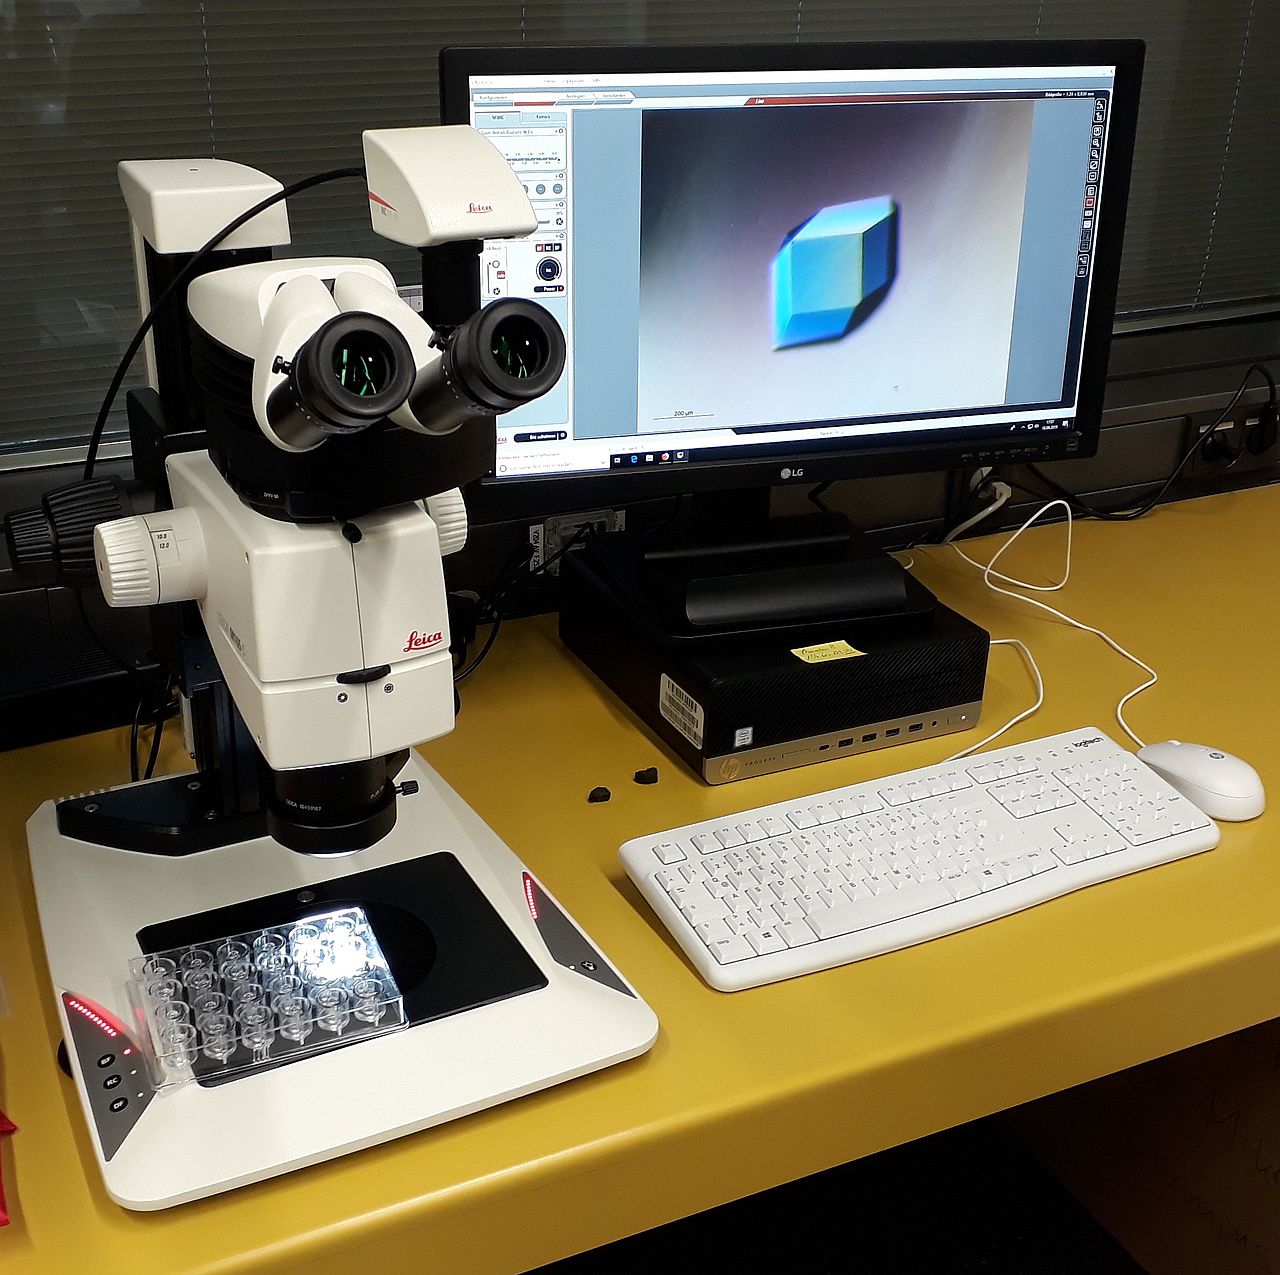 Leica binocular microscope for inspection and documentation of crystals